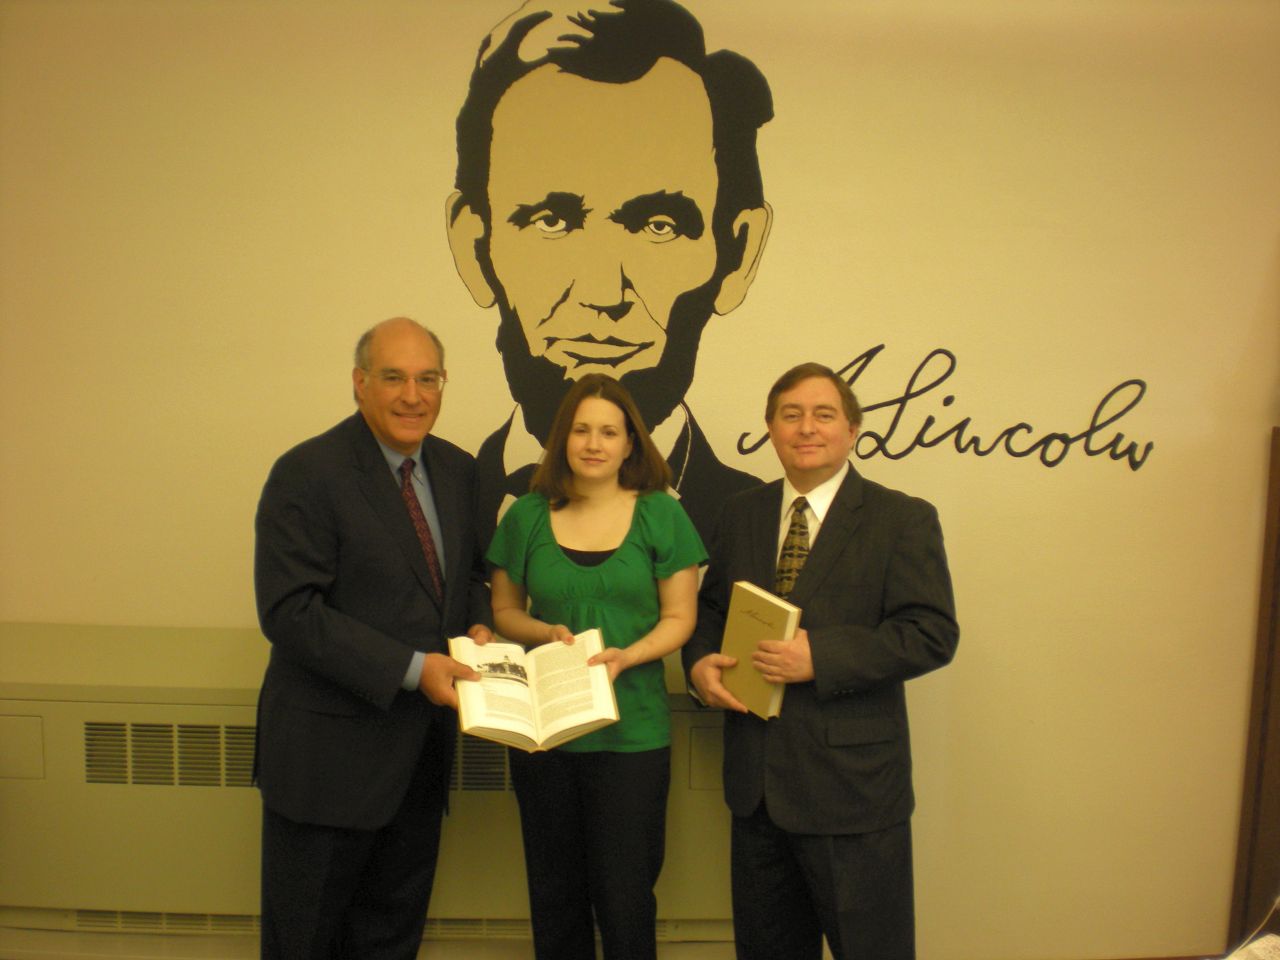 ISBA President-elect Mark Hassakis (at left) presented The Papers of Abraham Lincoln to the Vandalia Public Library on April 5. Accepting the books is Jessica Blain, library director. On hand for the presentation was Vandalia attorney David A. Oldfield, an ISBA member.